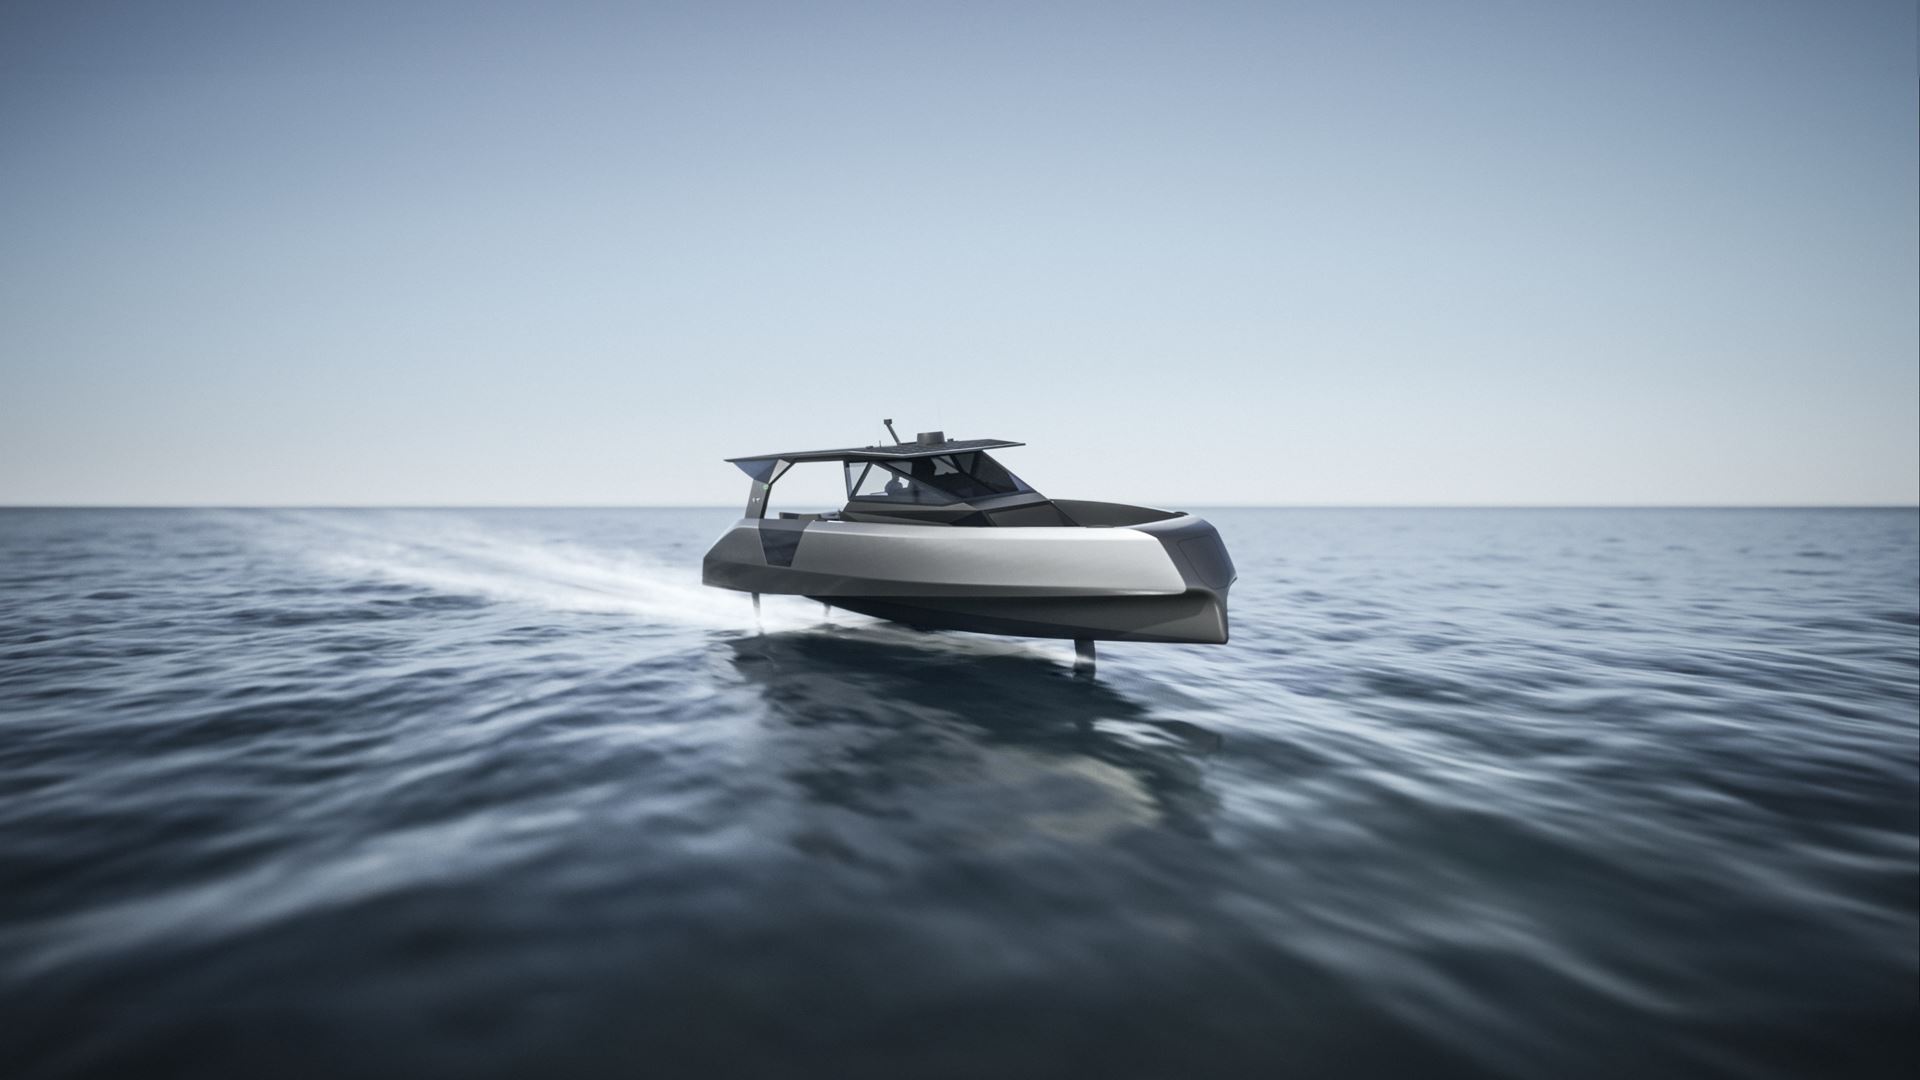 BMW TYDE Announce THE OPEN a new Electric Powered Hydrofoil Luxury Yacht